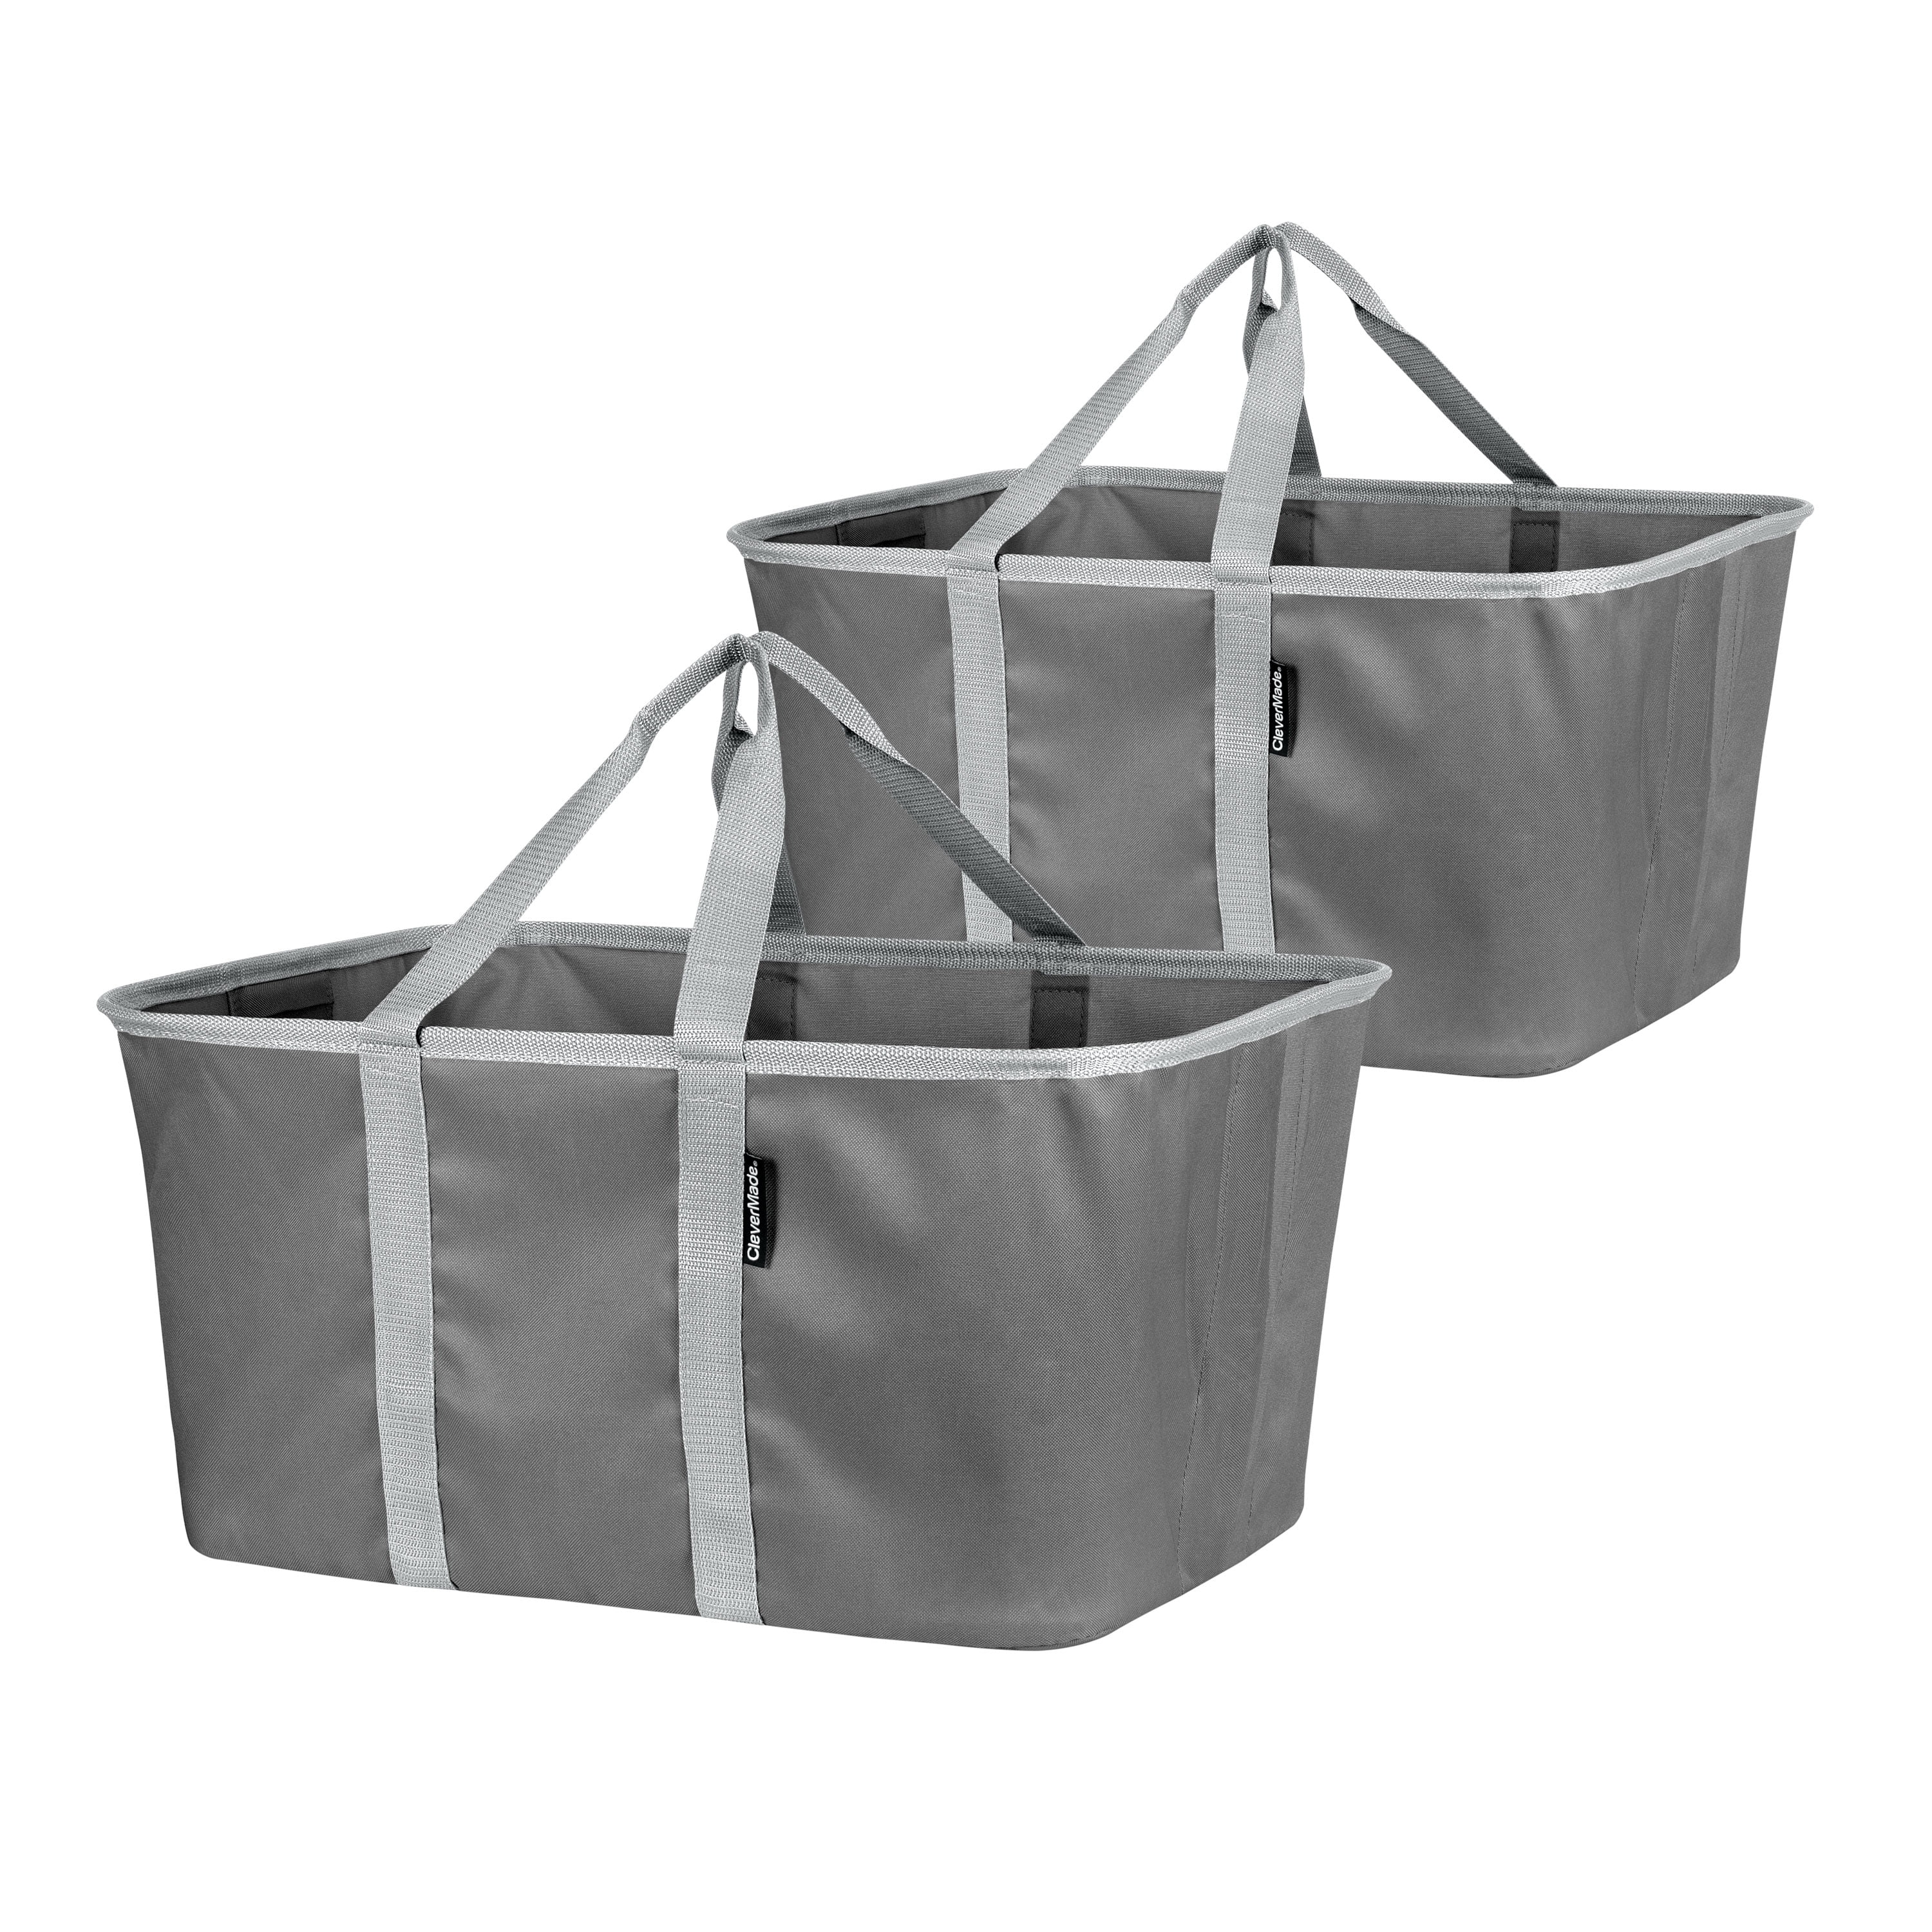 CleverMade Collapsible Fabric Laundry Baskets - Foldable Pop Up Storage  Container Organizer Bags - Large Rectangular Space Saving Clothes Hamper  Tote with Carry Handles, Pack of 2, Charcoal 